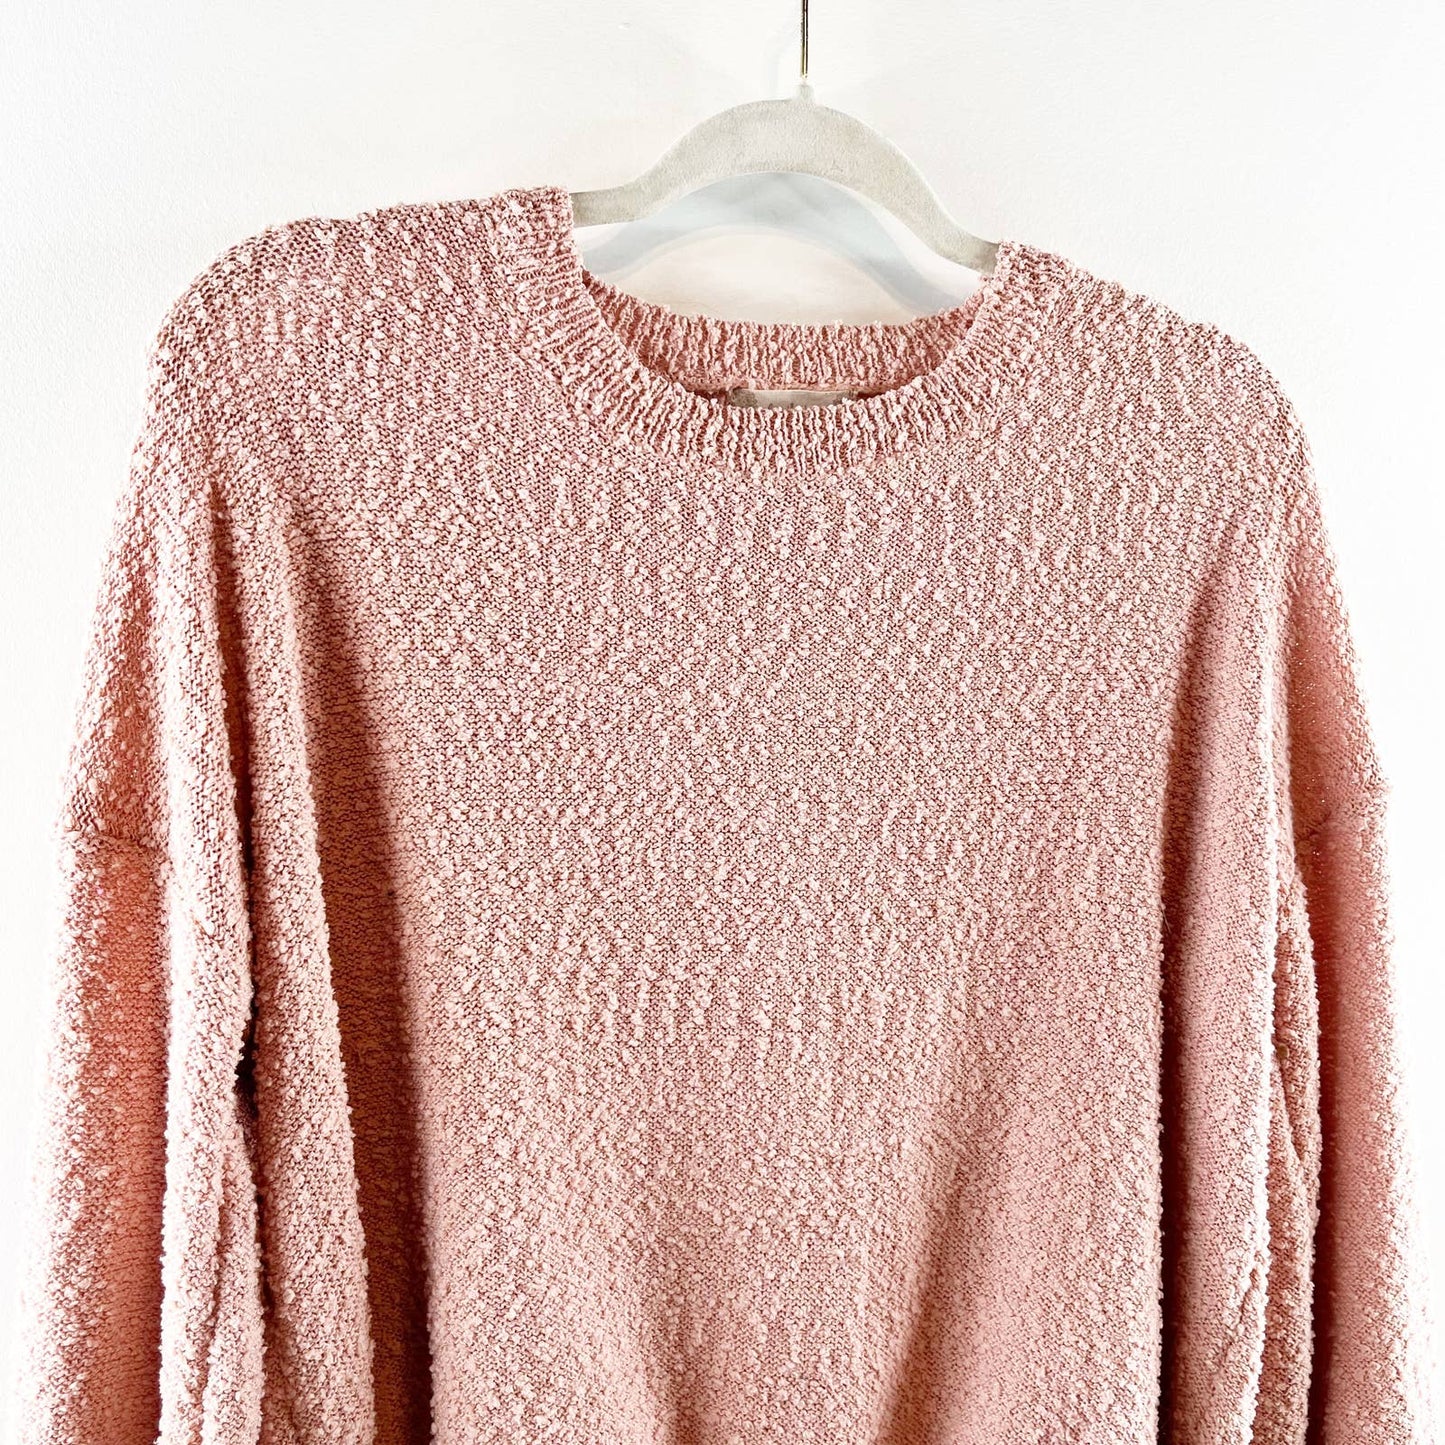 Altar'd State Textured Terry Long Sleeve Crewneck Pullover Sweater Pink XS / S